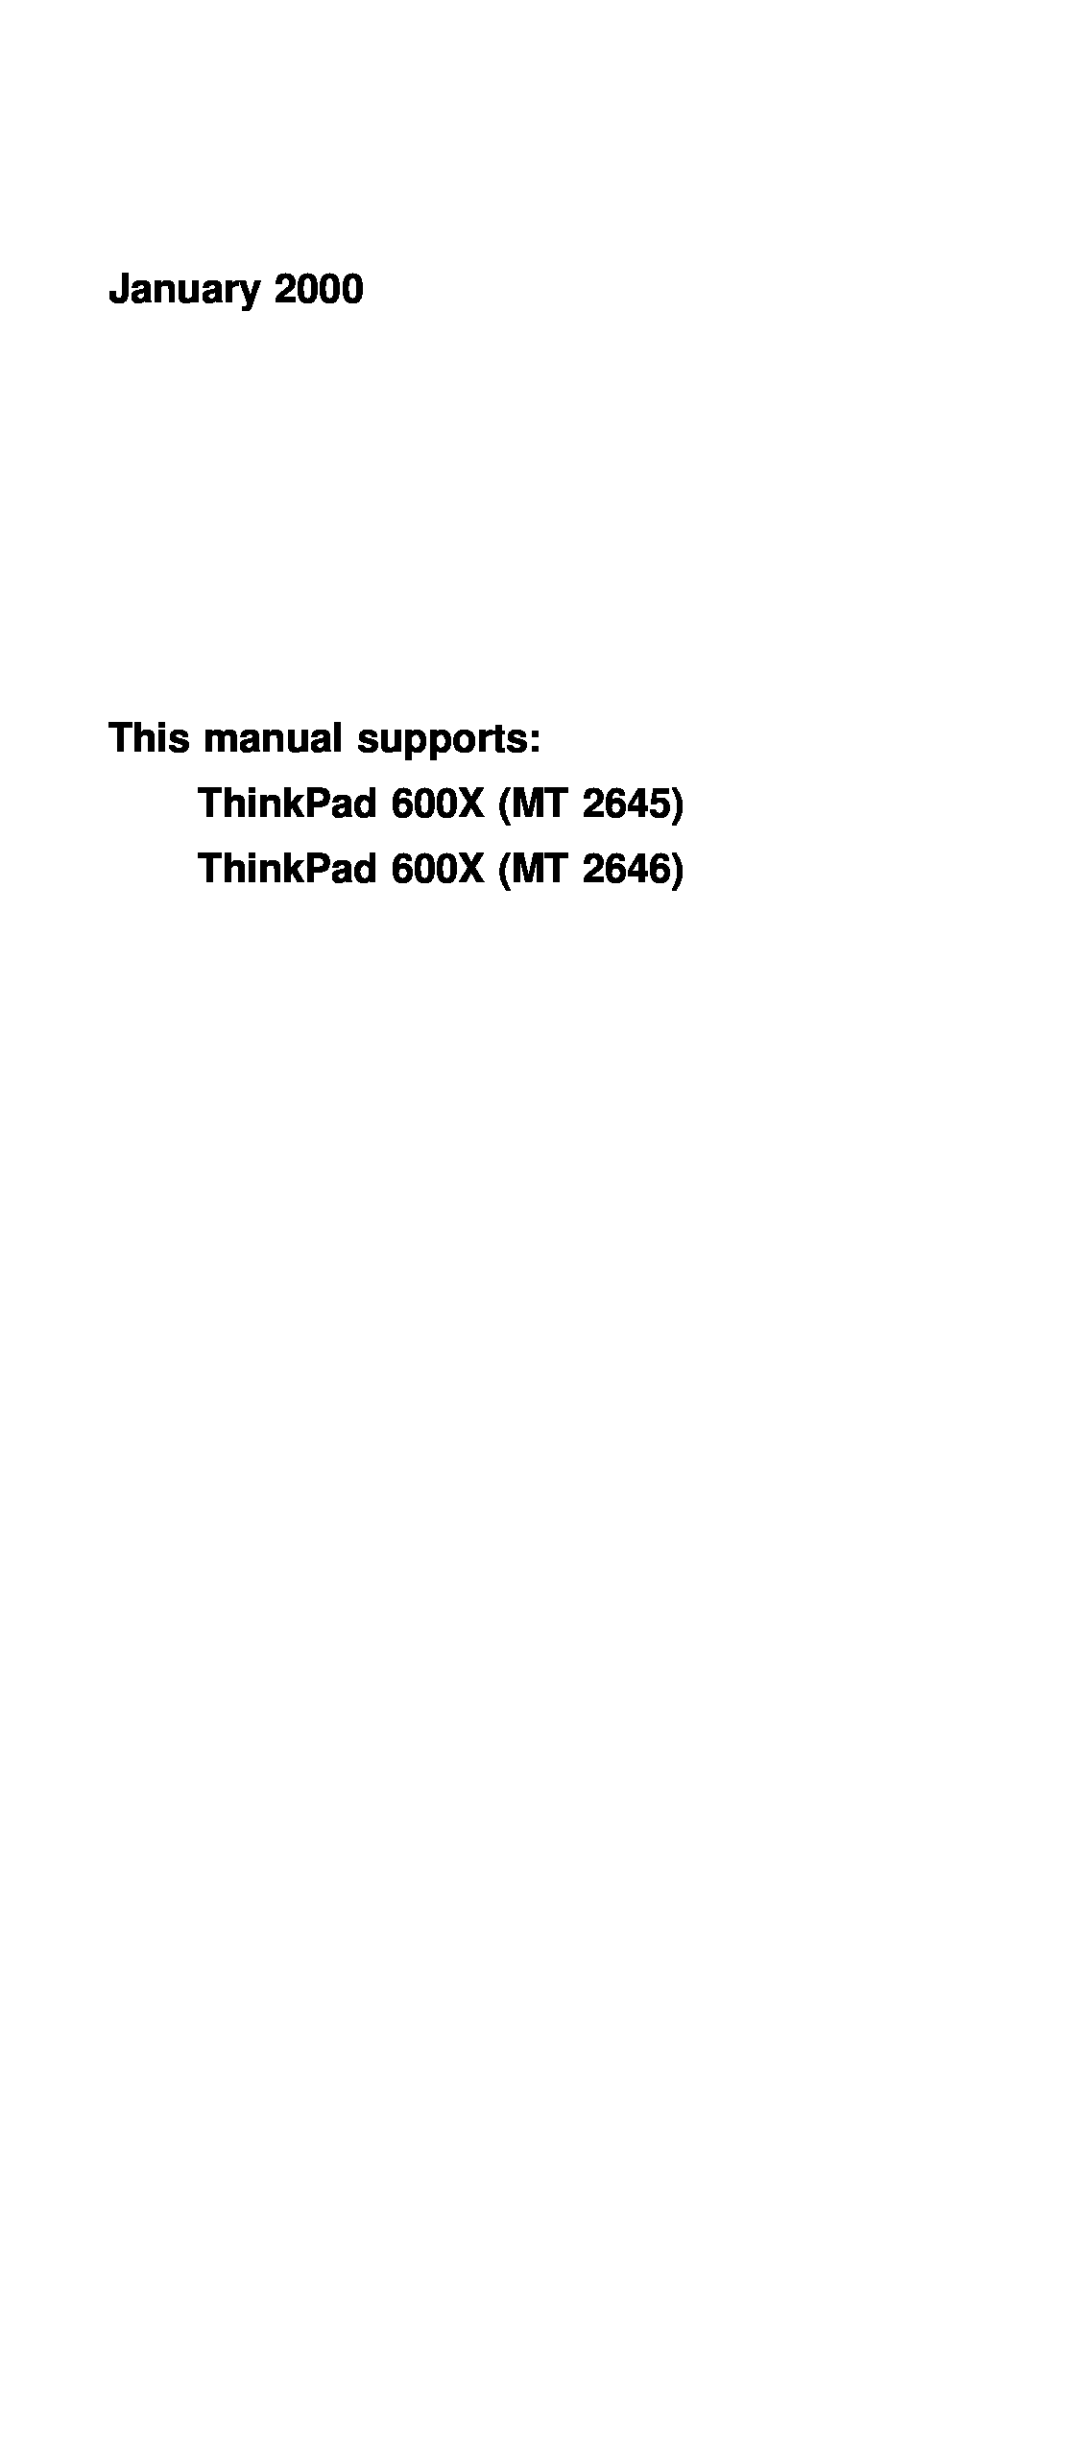 IBM 600X (MT 2646) manual January, supports, This manual 